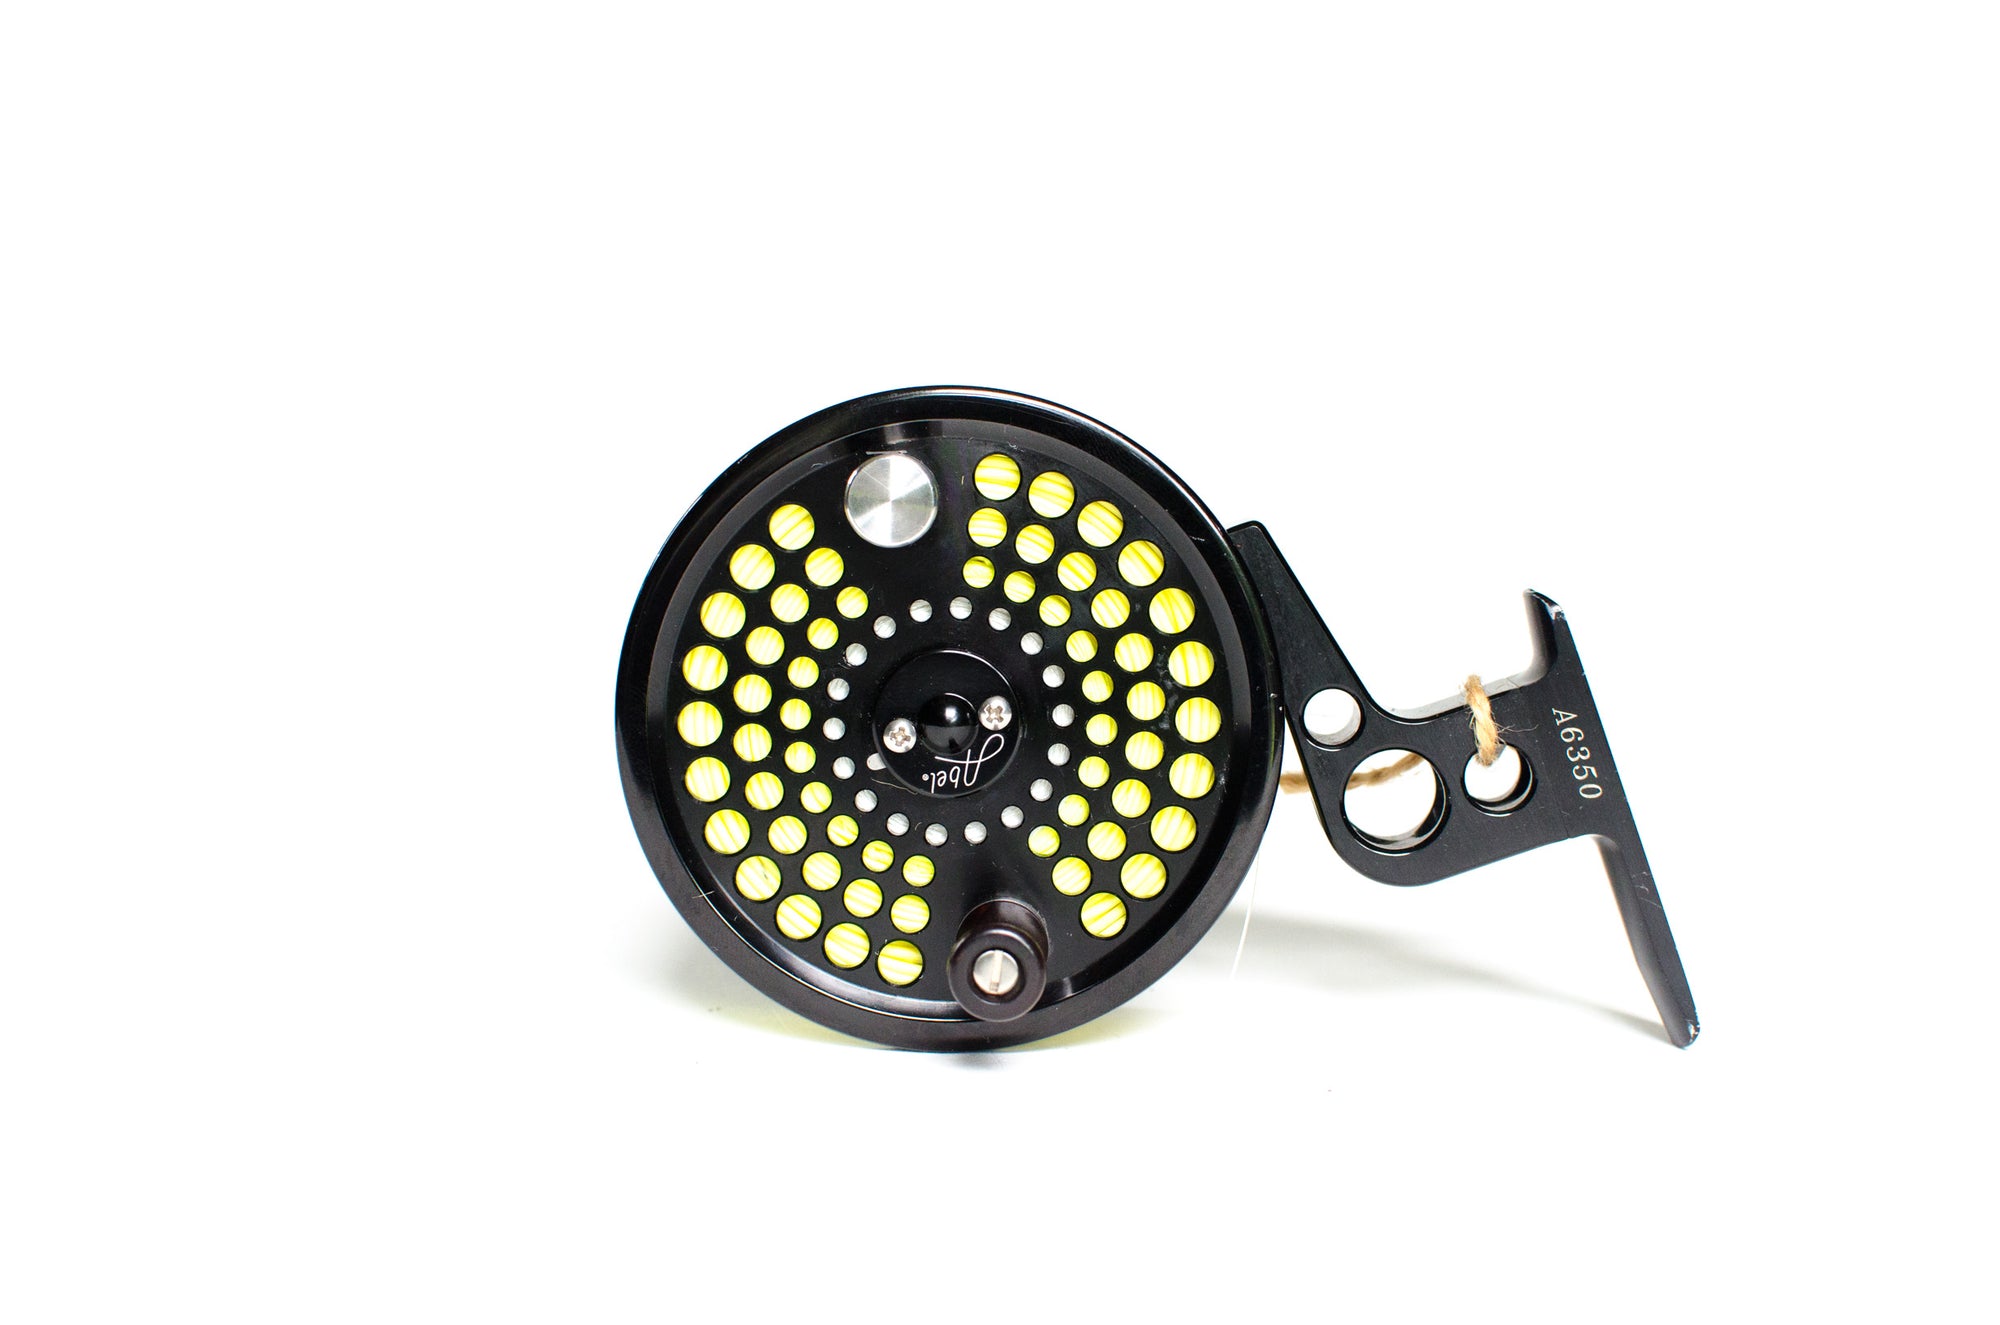 https://cdn.shopify.com/s/files/1/0891/1228/products/Abel_Trout_Reel_842e7b0d-8a37-4bd0-96e8-36f2f2c197de_2000x.jpg?v=1584892288